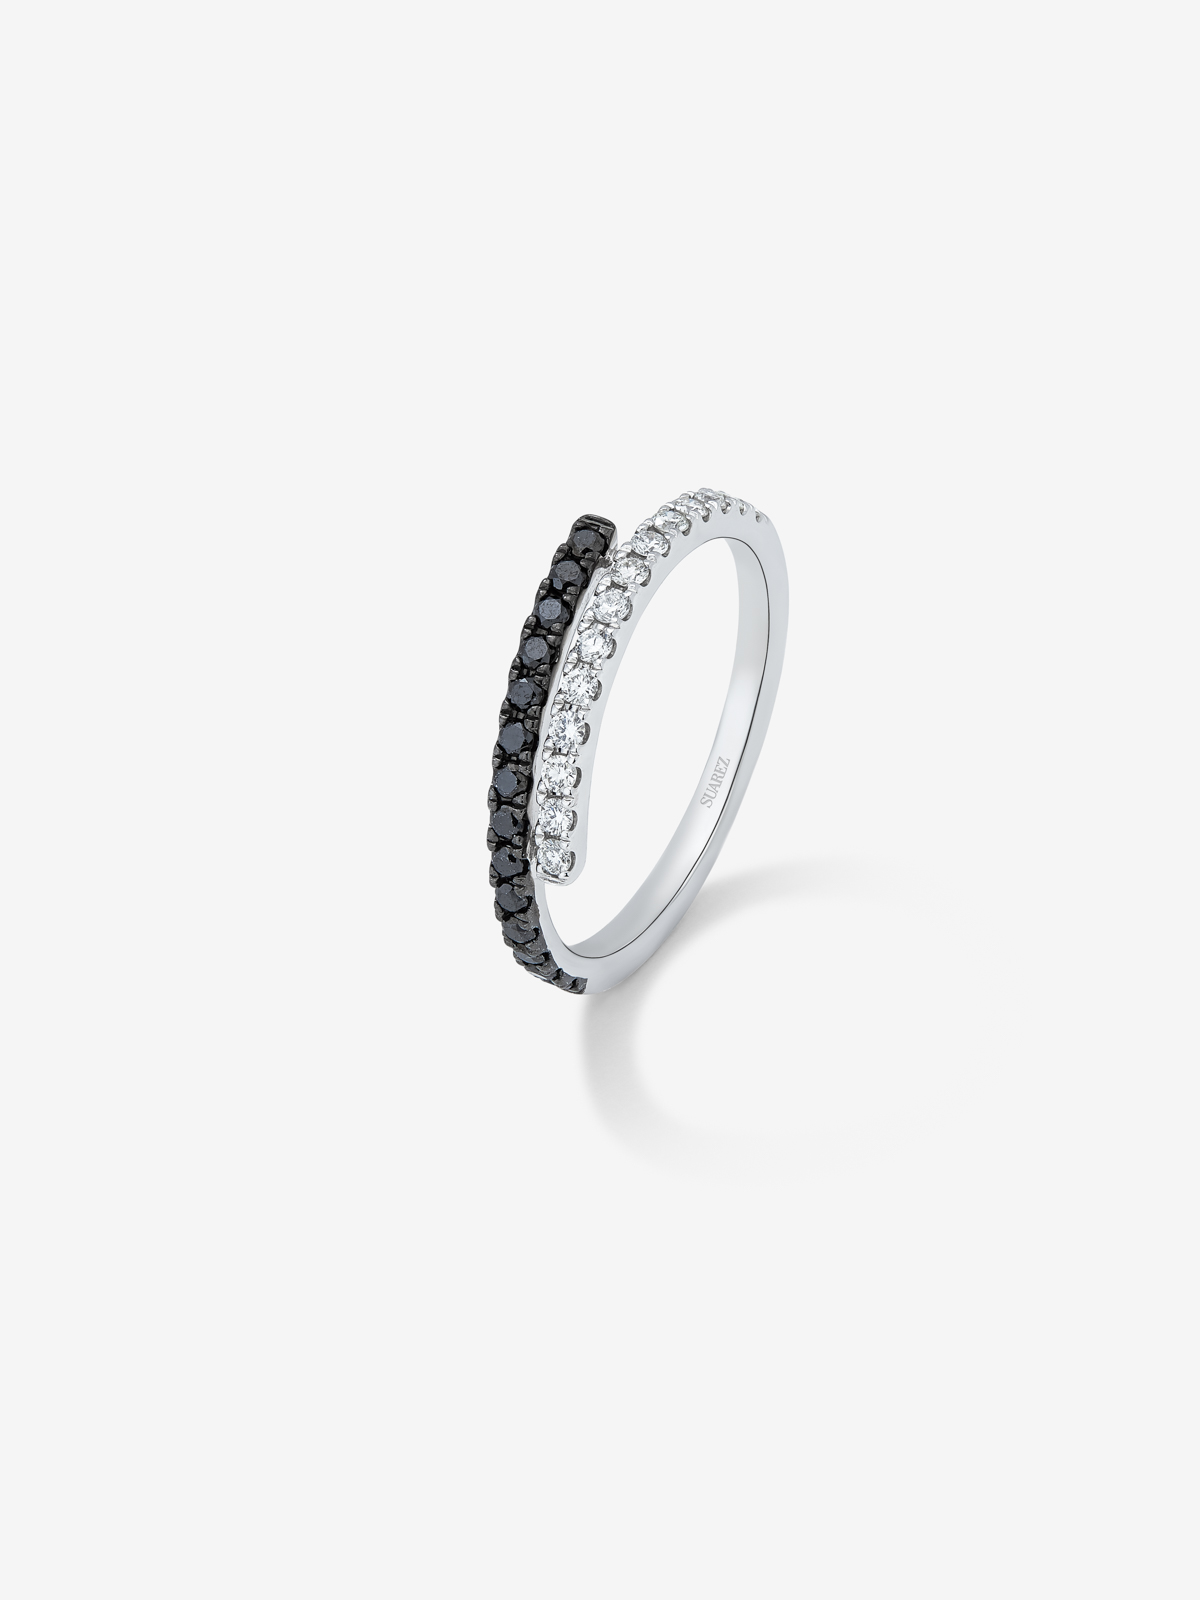 Middle ring Open White Gold 18k with white diamonds and black diamonds